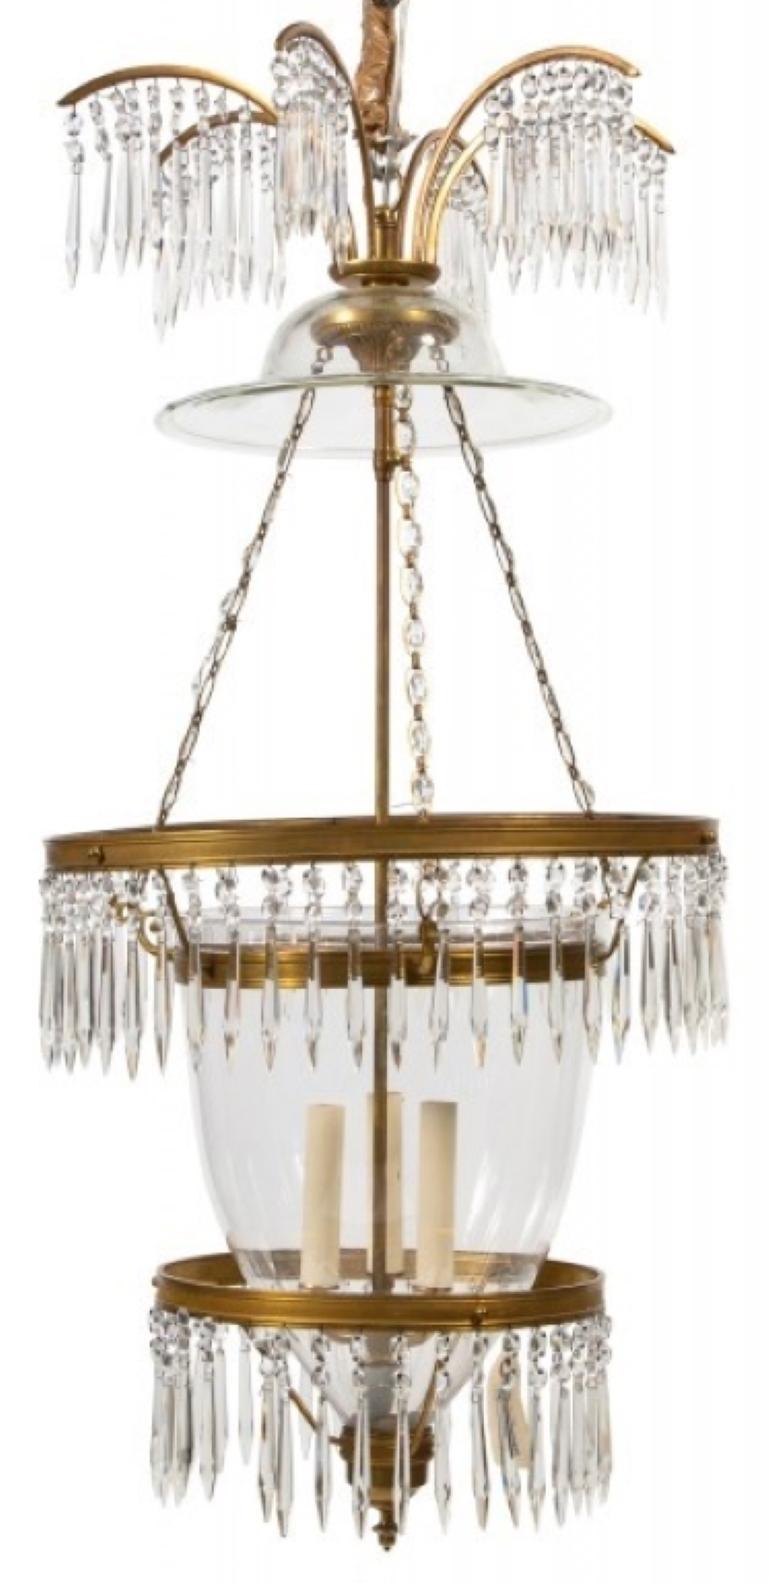 A marvelous and impressive pair of Russian crystal & ormolu mounted three-light lantern chandeliers. A pair of Russian neoclassical style lantern chandeliers with hand-diamond cut crystal prisms in an impressive addition to any room. These